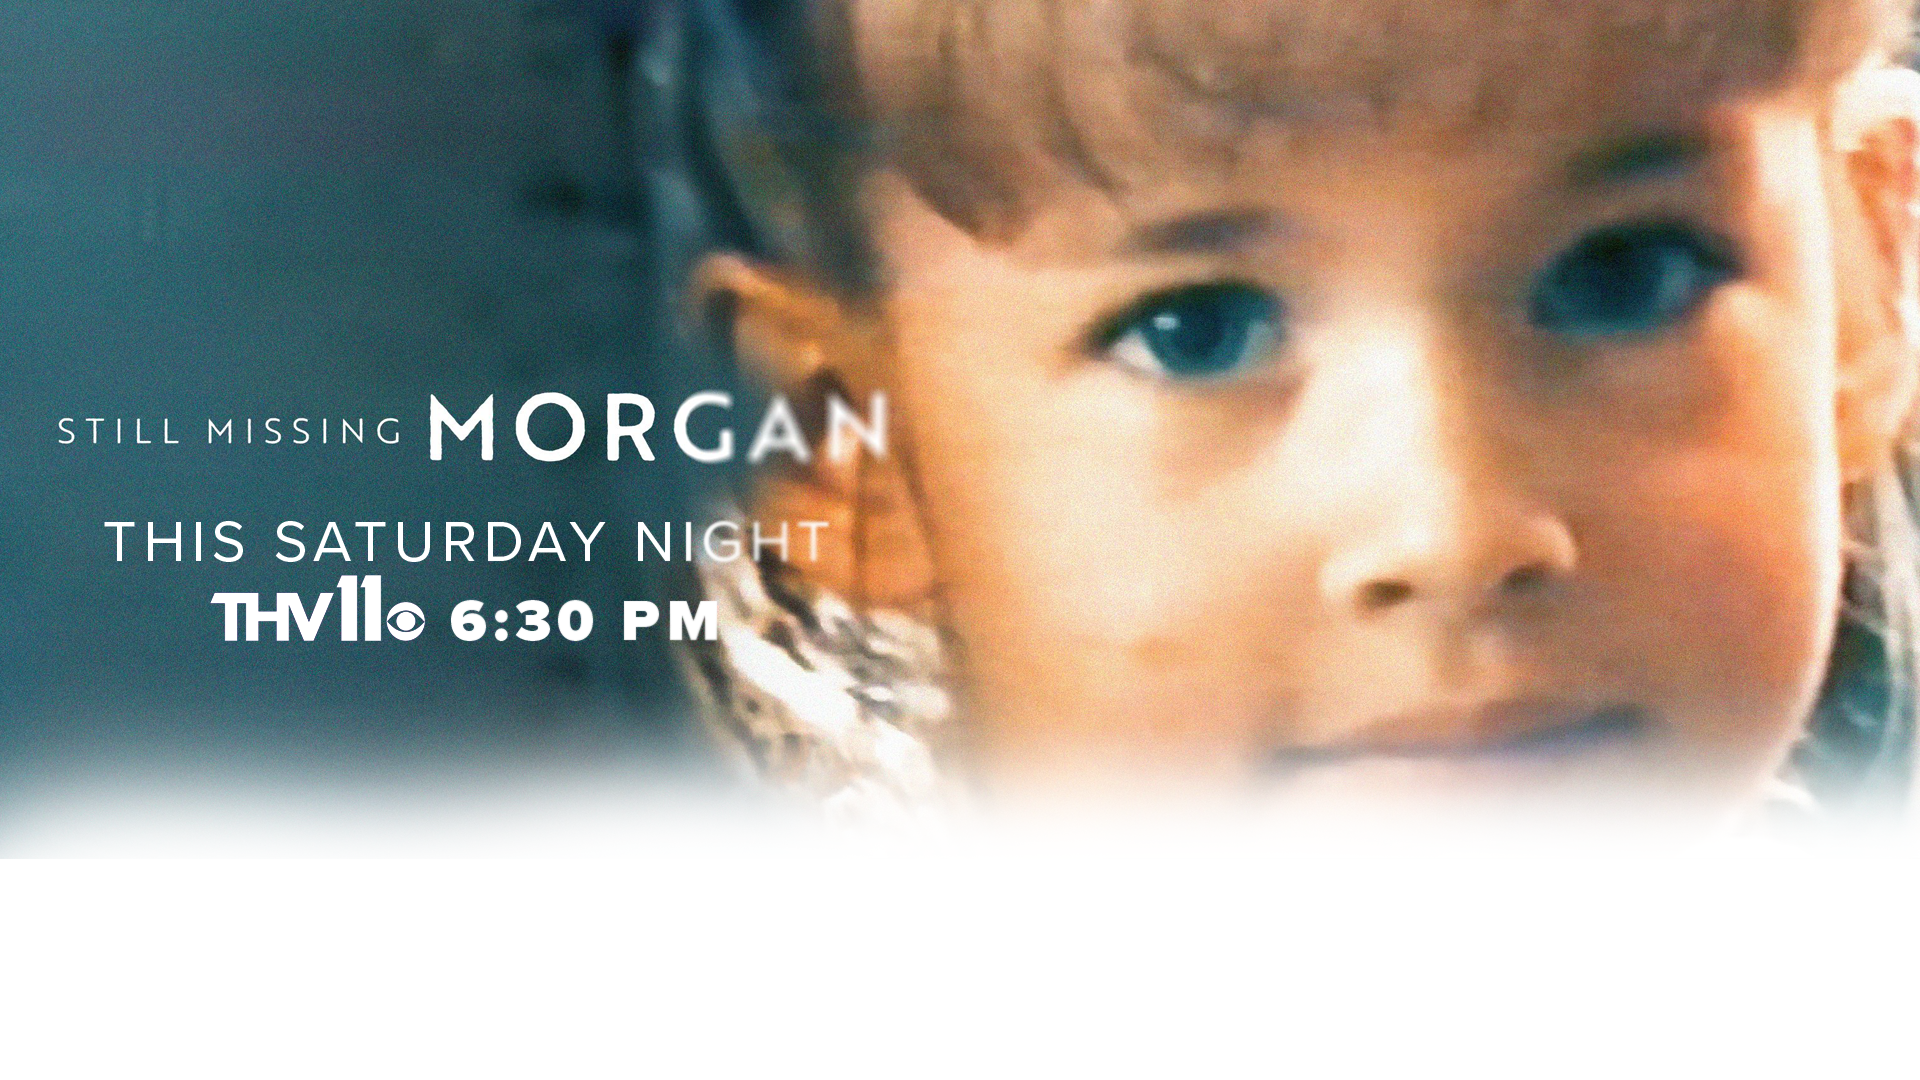 It's the 25th anniversary of Morgan Nick's disappearance. The foundation held a balloon release to honor her memory.